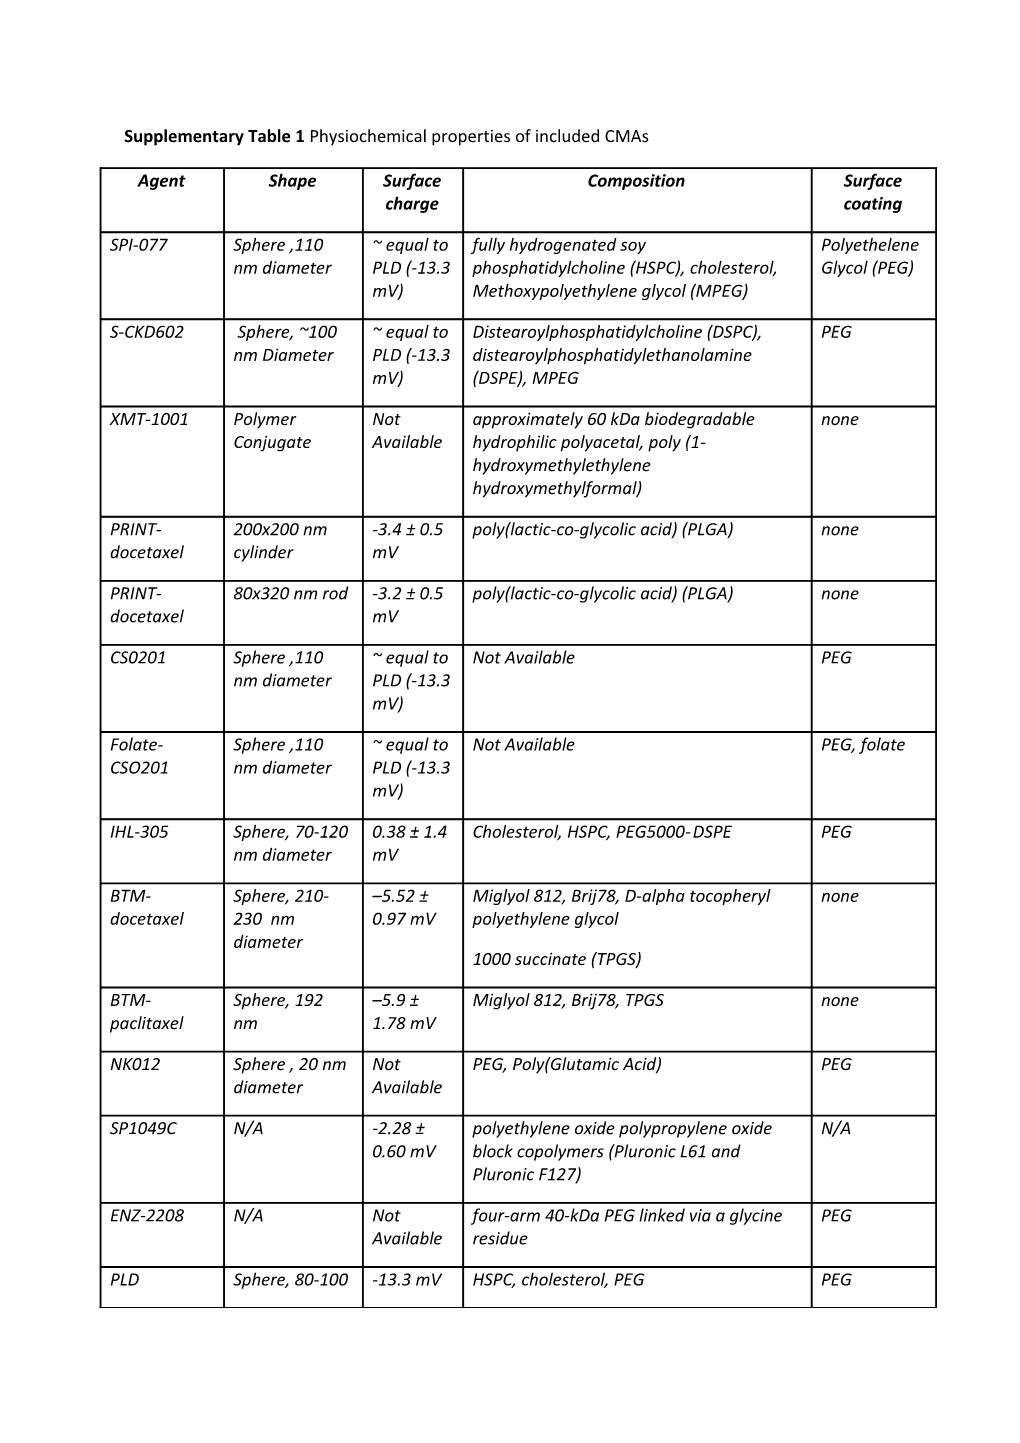 Supplementary Table 1 Physiochemical Properties of Included Cmas